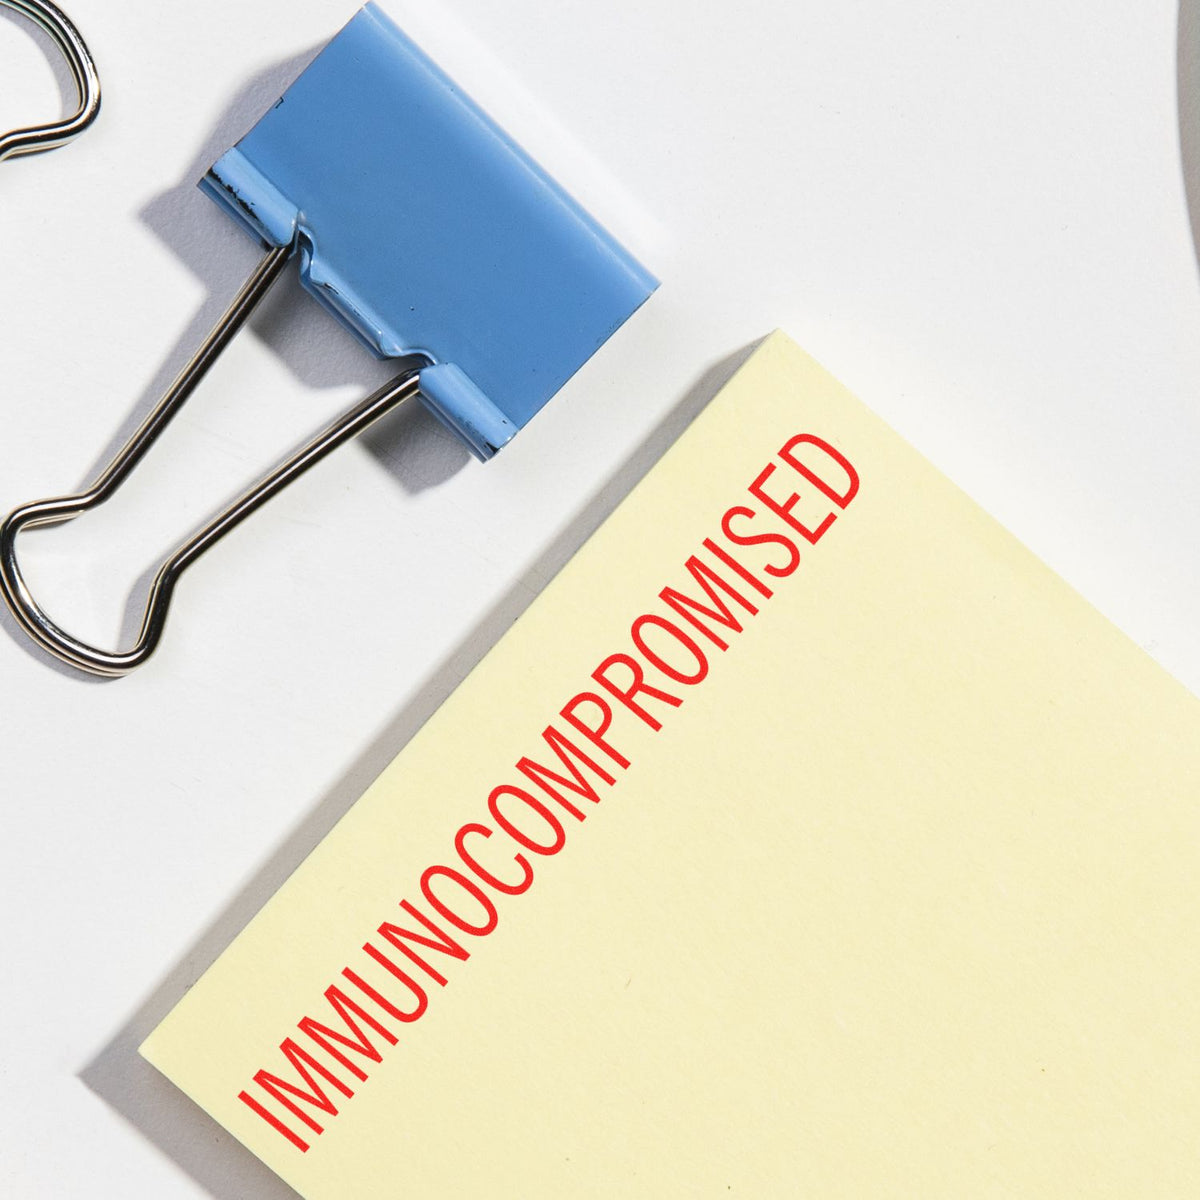 Immunocompromised Rubber Stamp In Use Photo